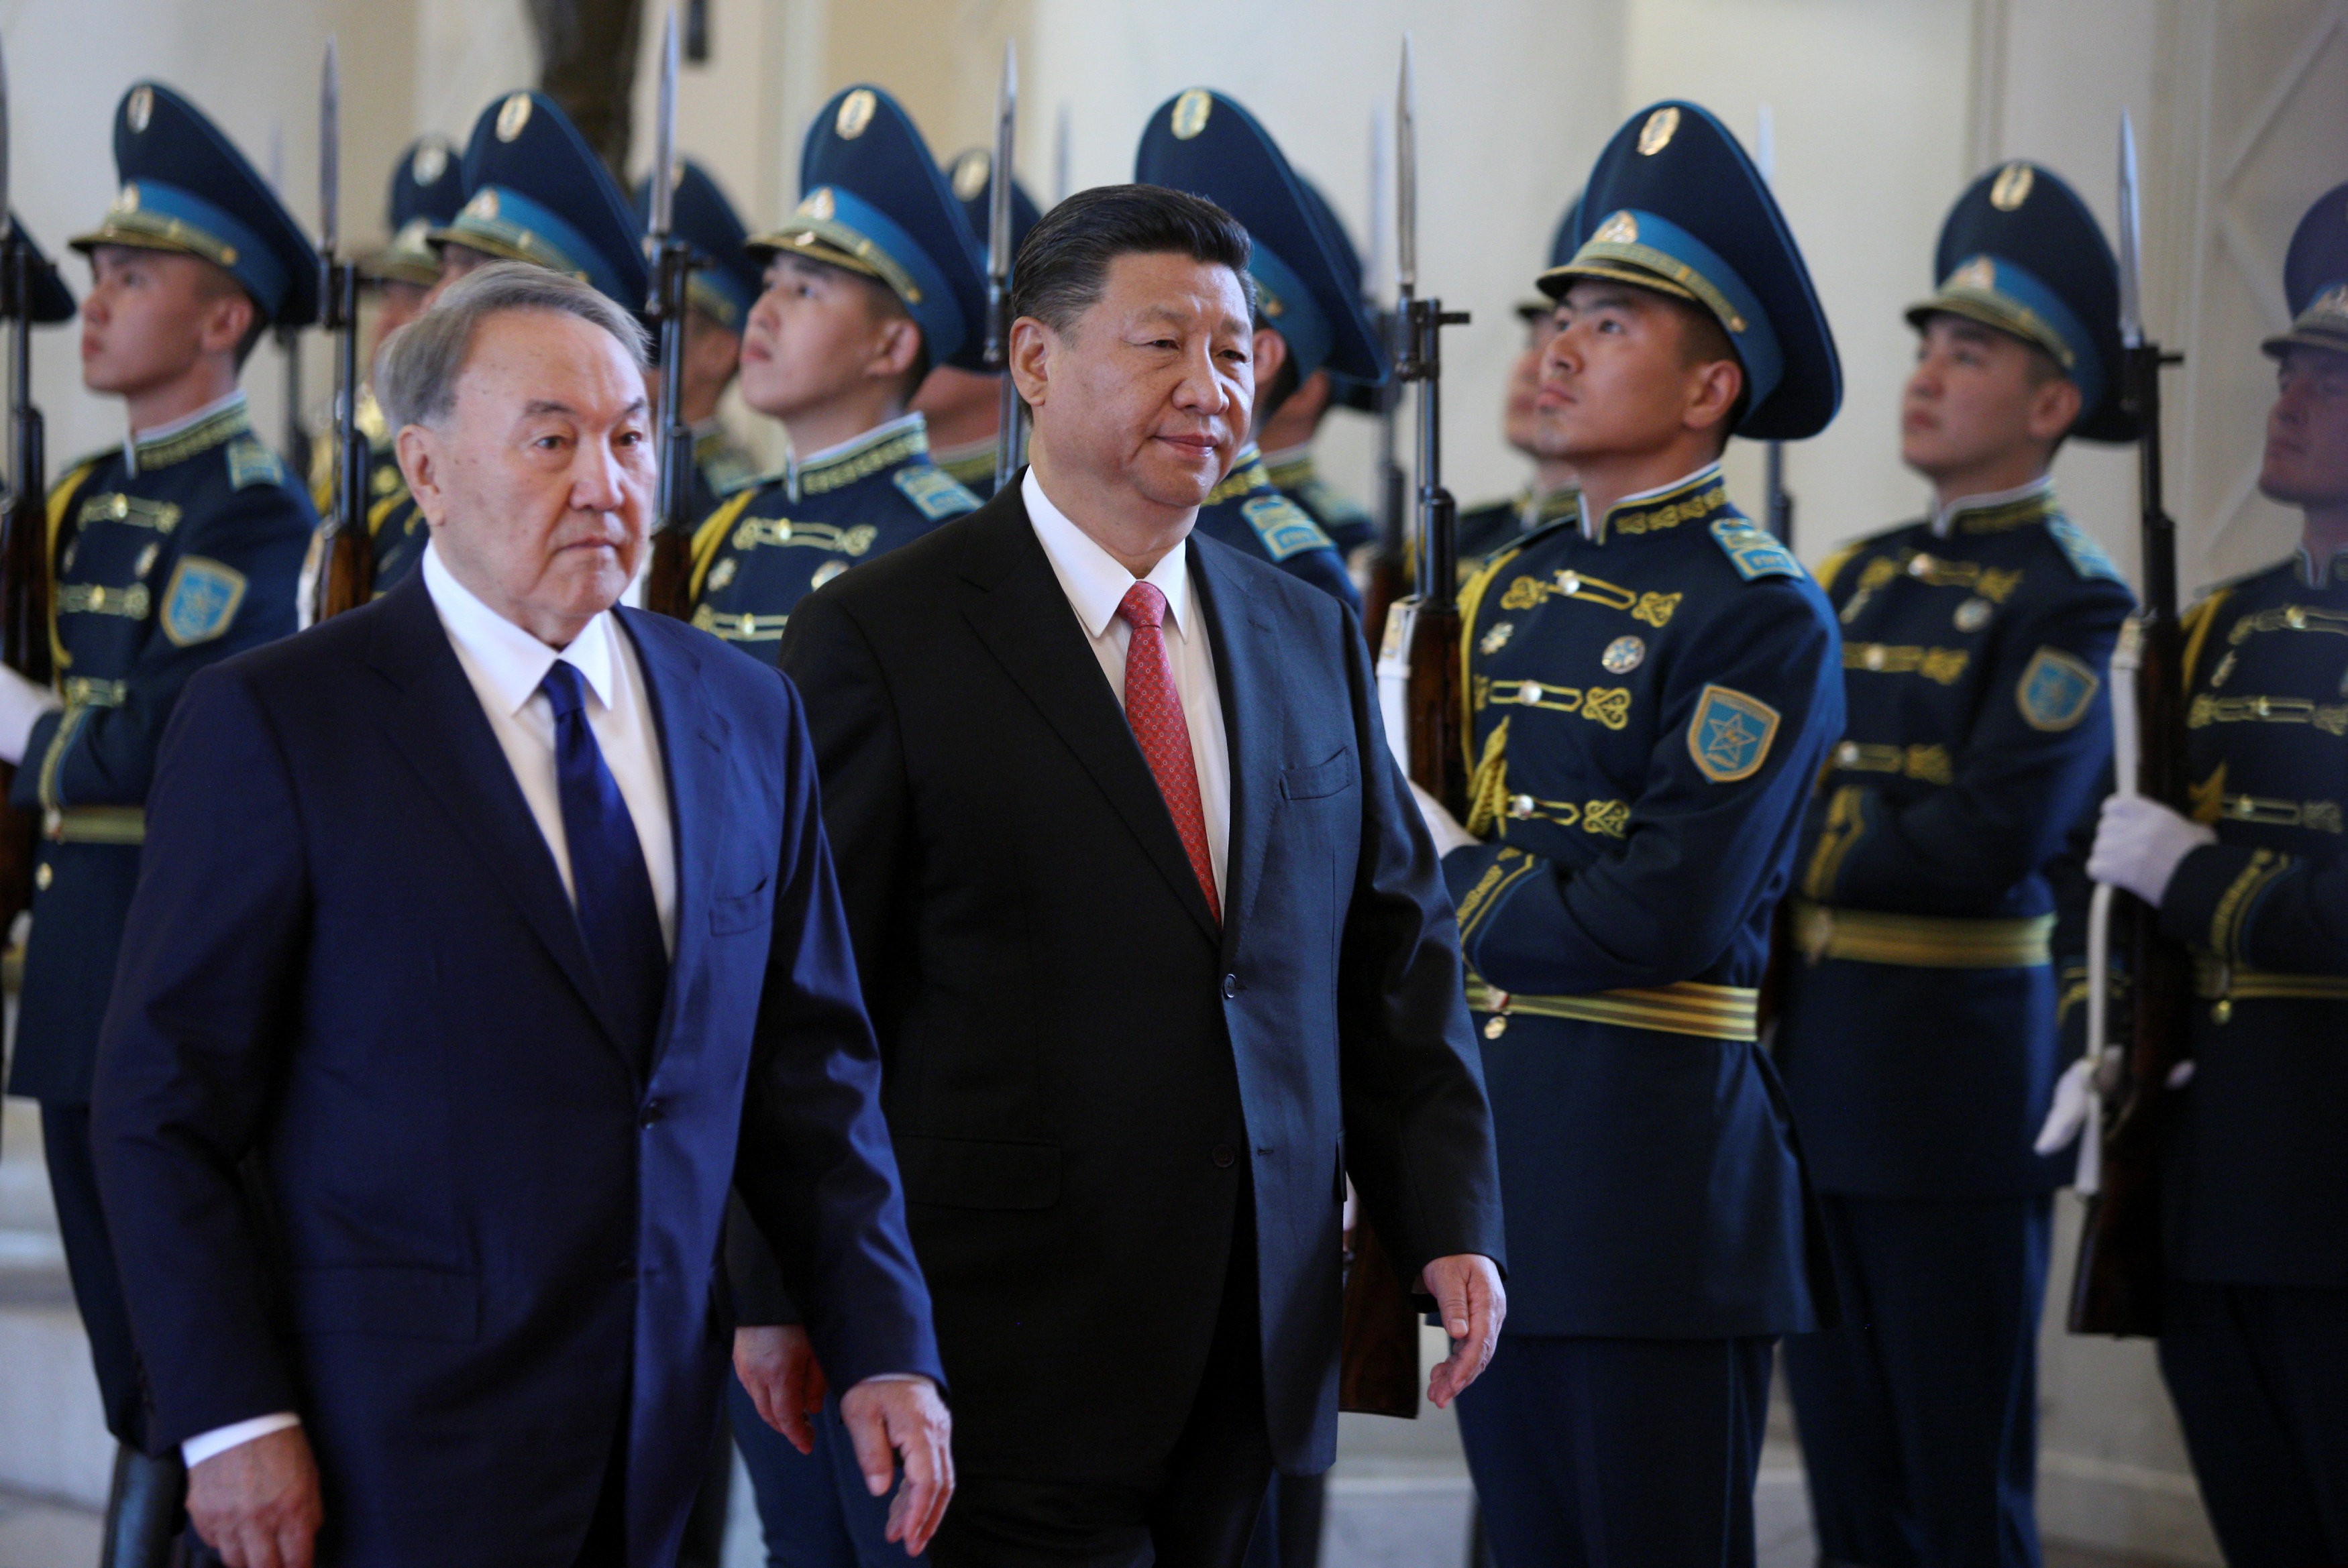 Kazakh president Nursultan Nazarbayev and China’s Xi Jinping review the honour guard during a welcoming ceremony before their meeting as part of the Shanghai Cooperation Organisation in Astana. Photo: Reuters